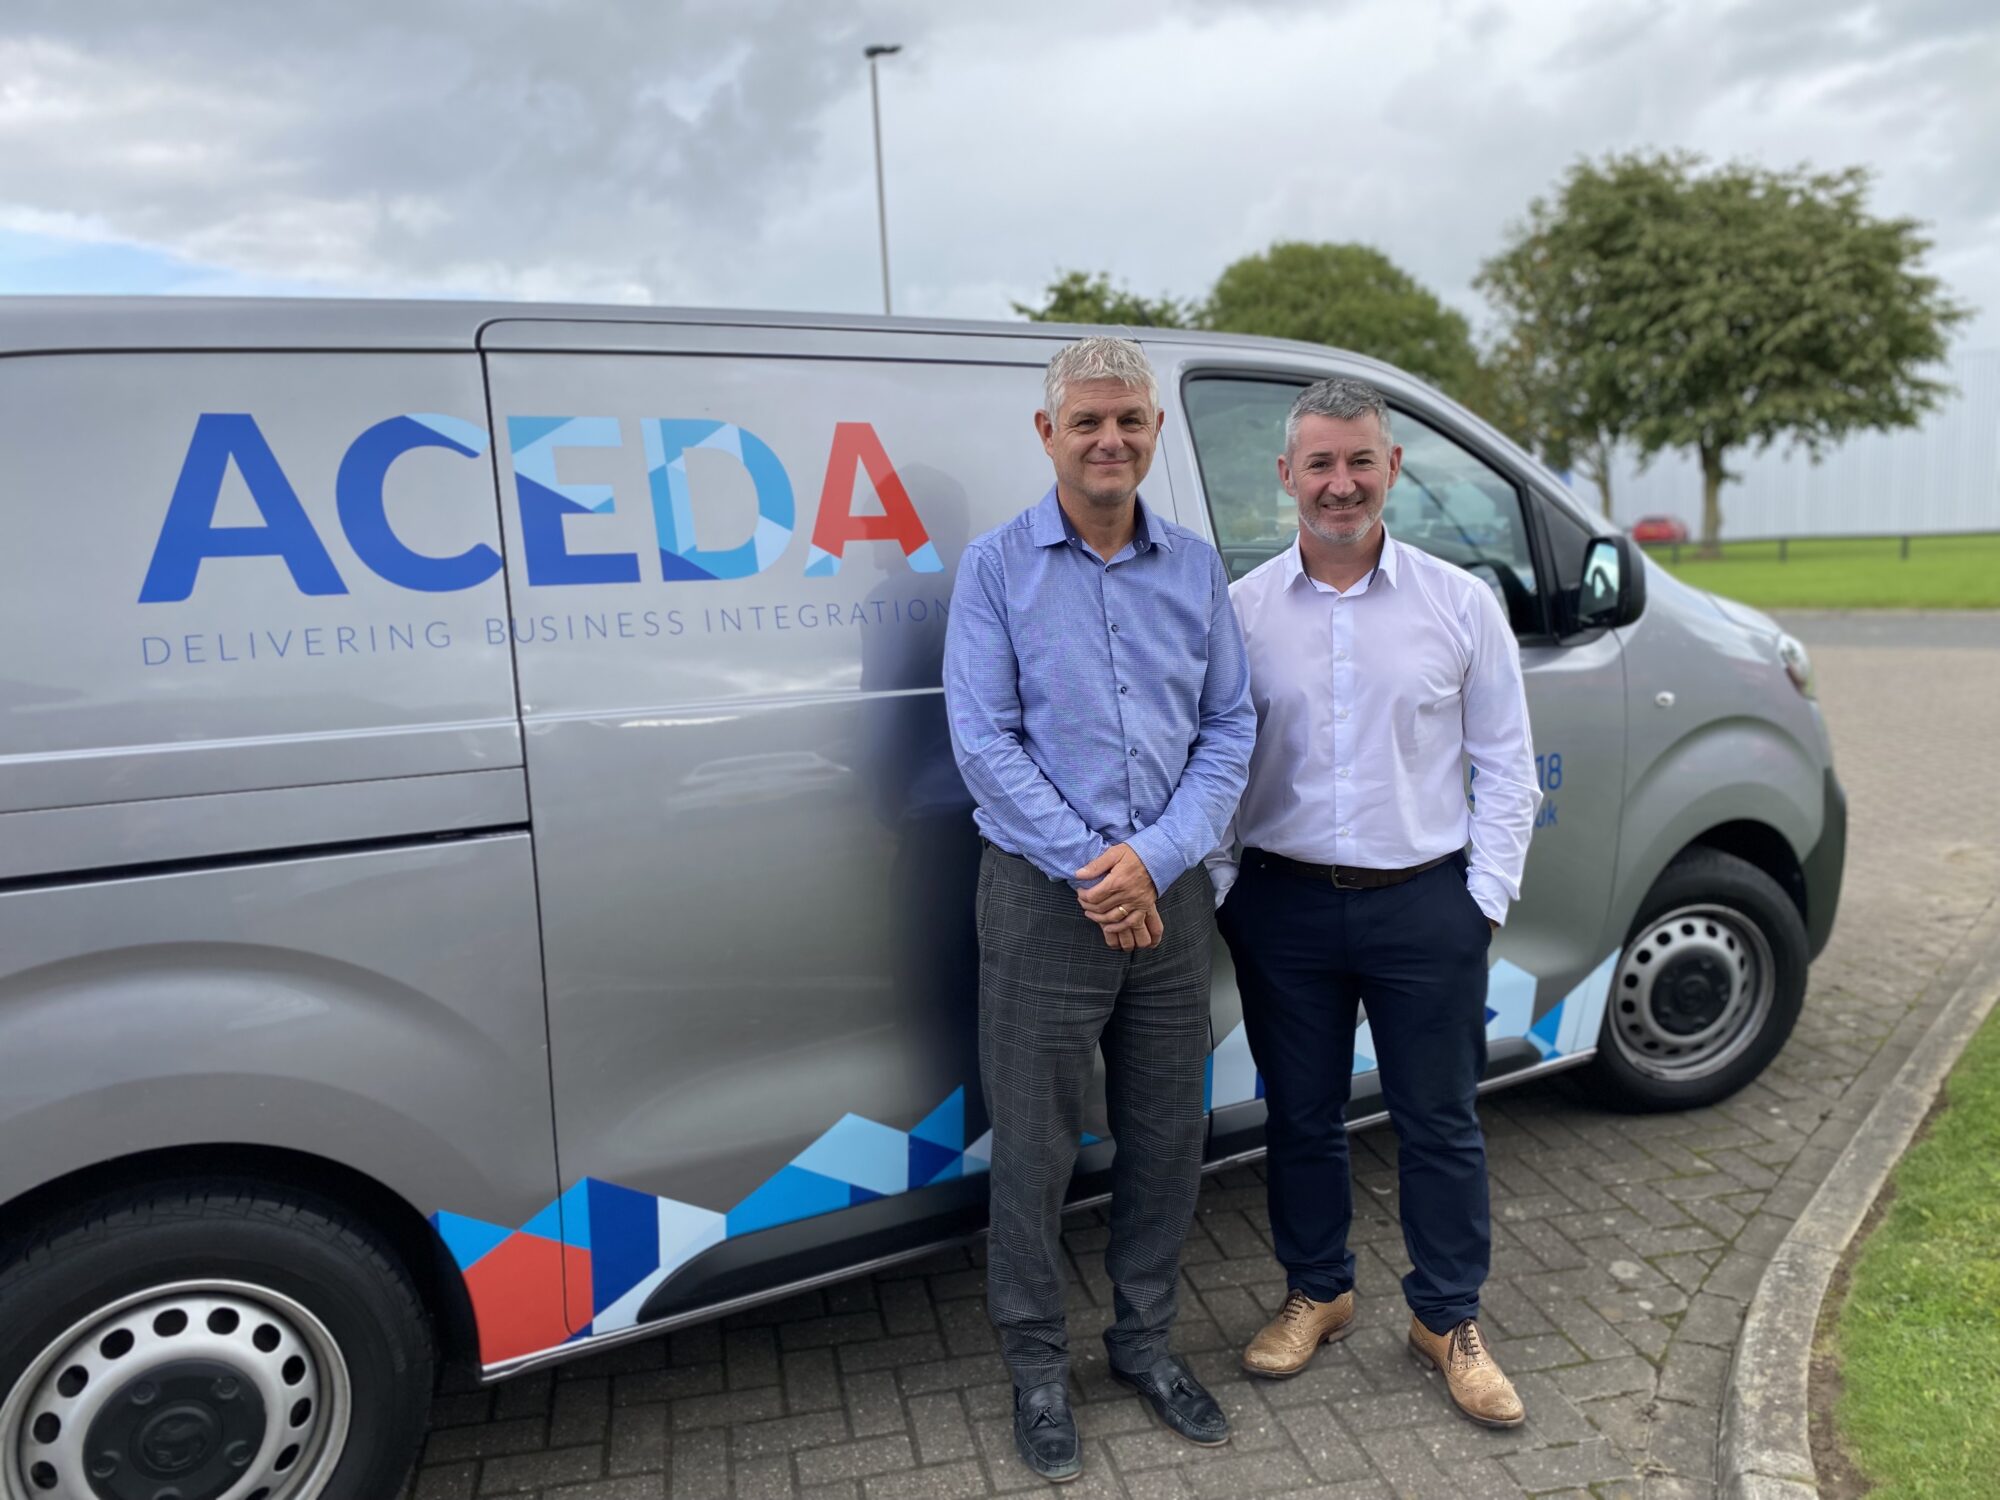 ACEDA completes headquarters relocation as business growth soars